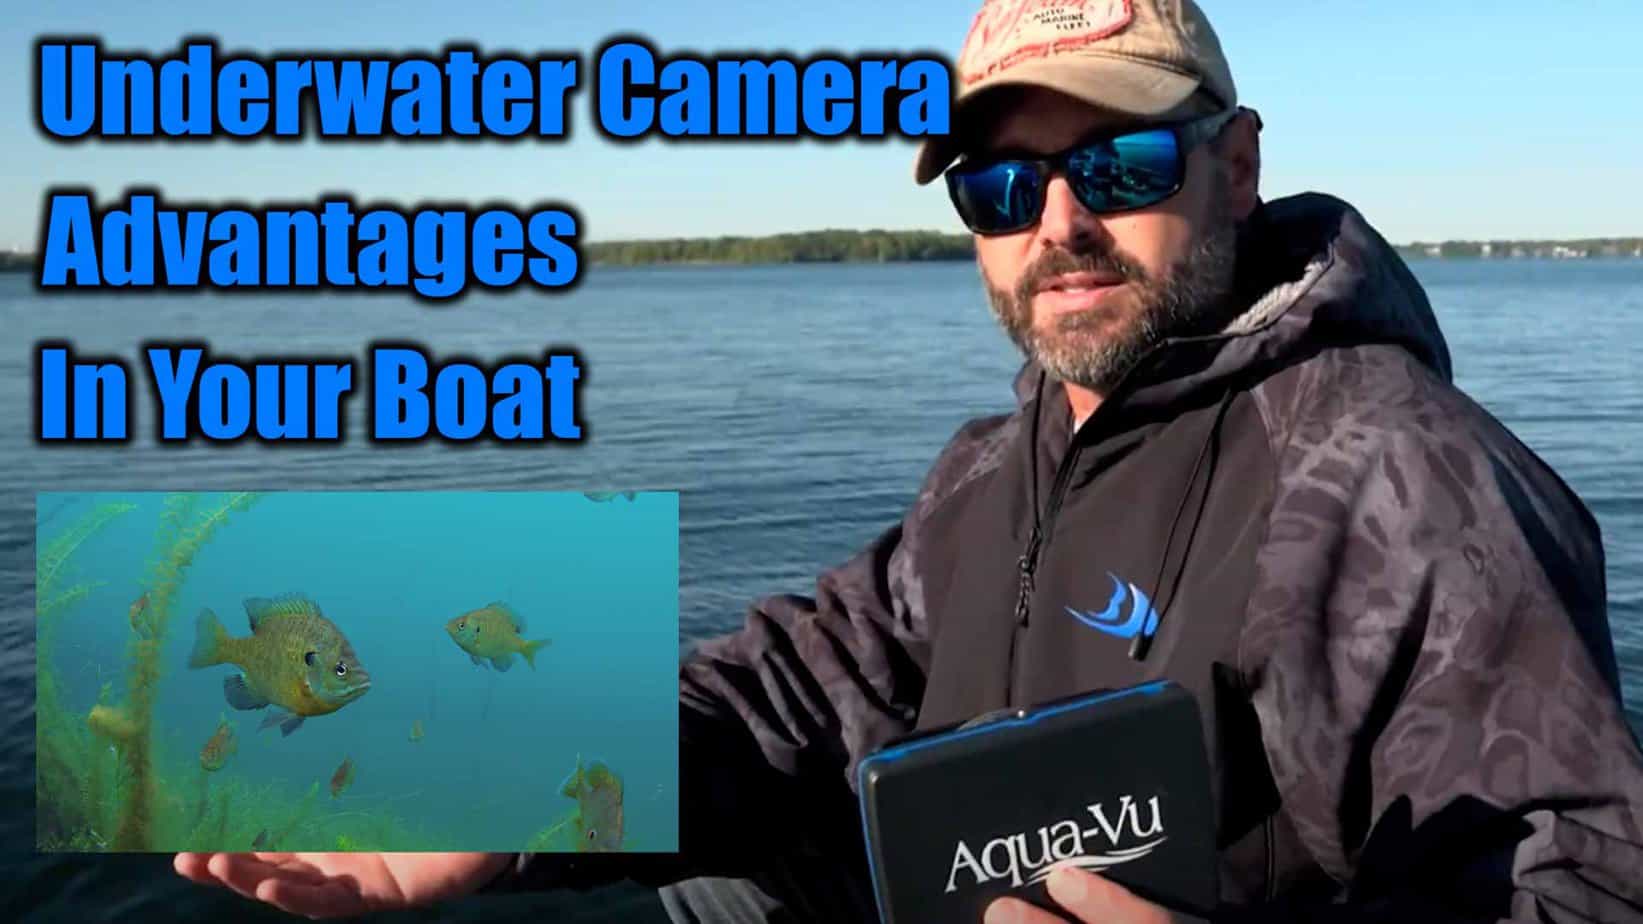 Underwater Camera Advantages In Your Boat